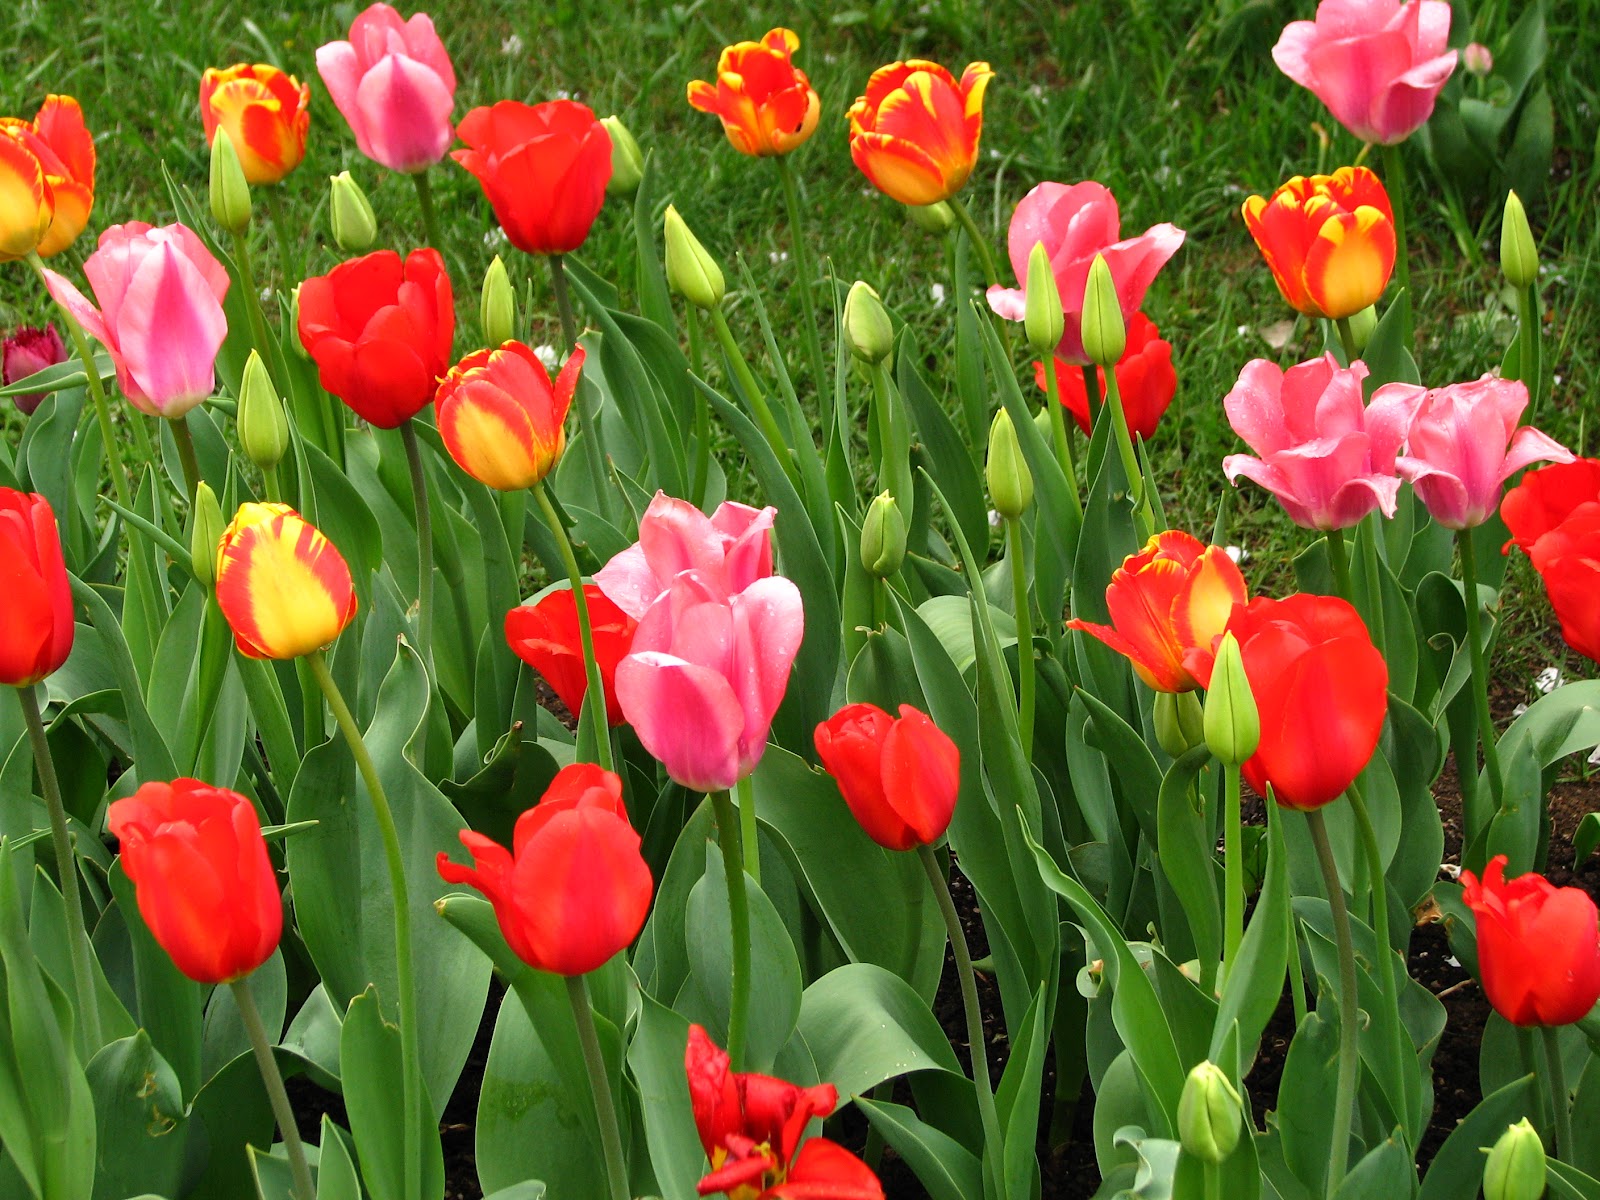 File:Spring border from tulips